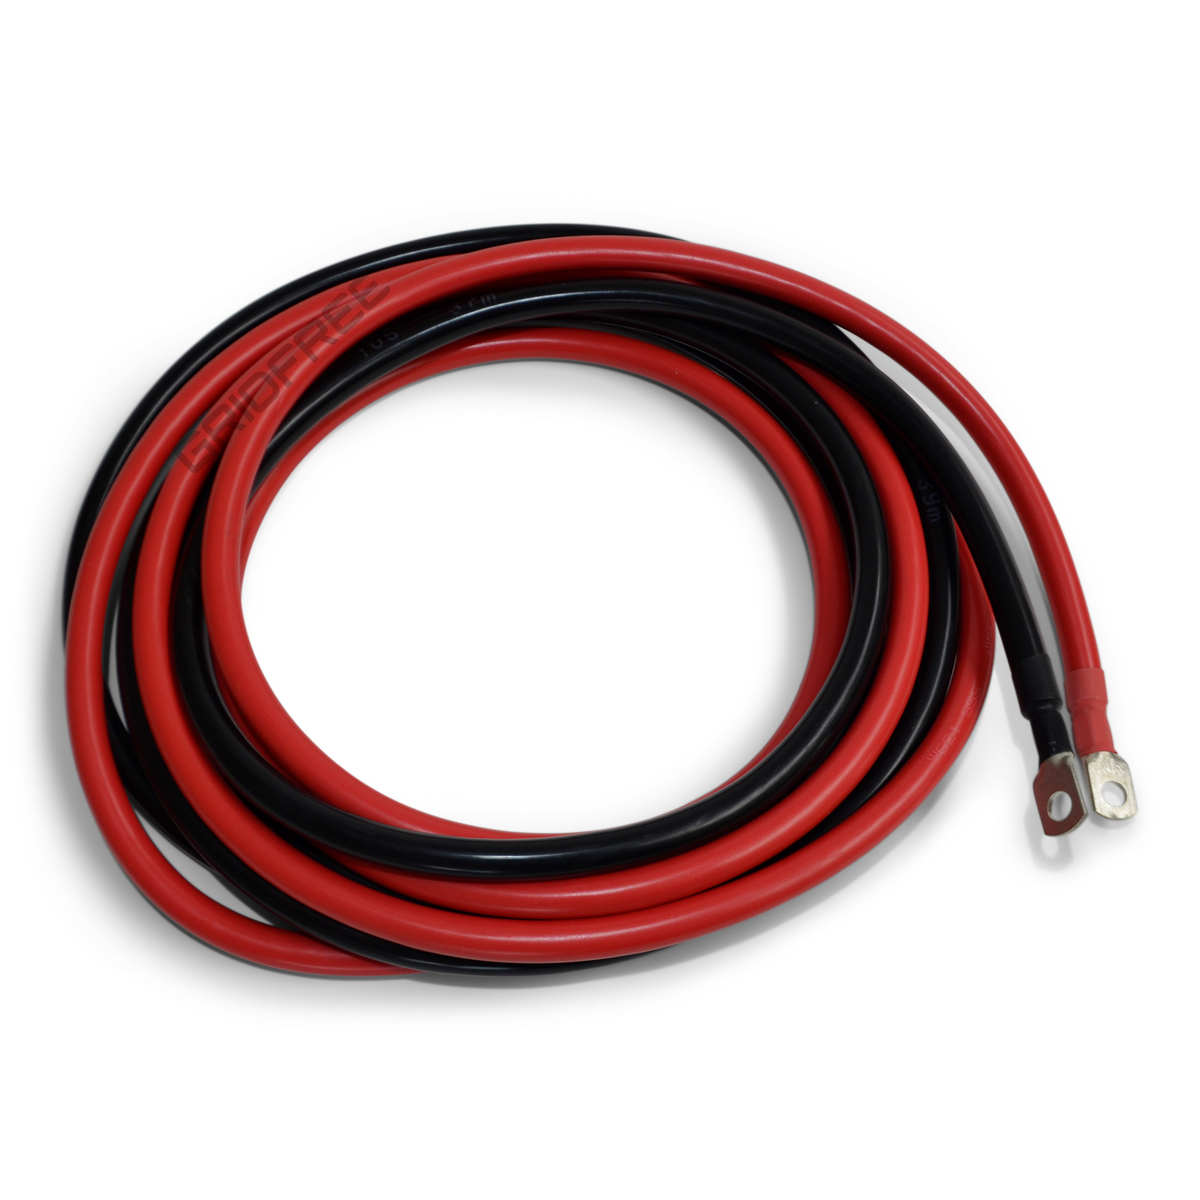 35mm² Pre-Crimped Cable Red&Black - 3m